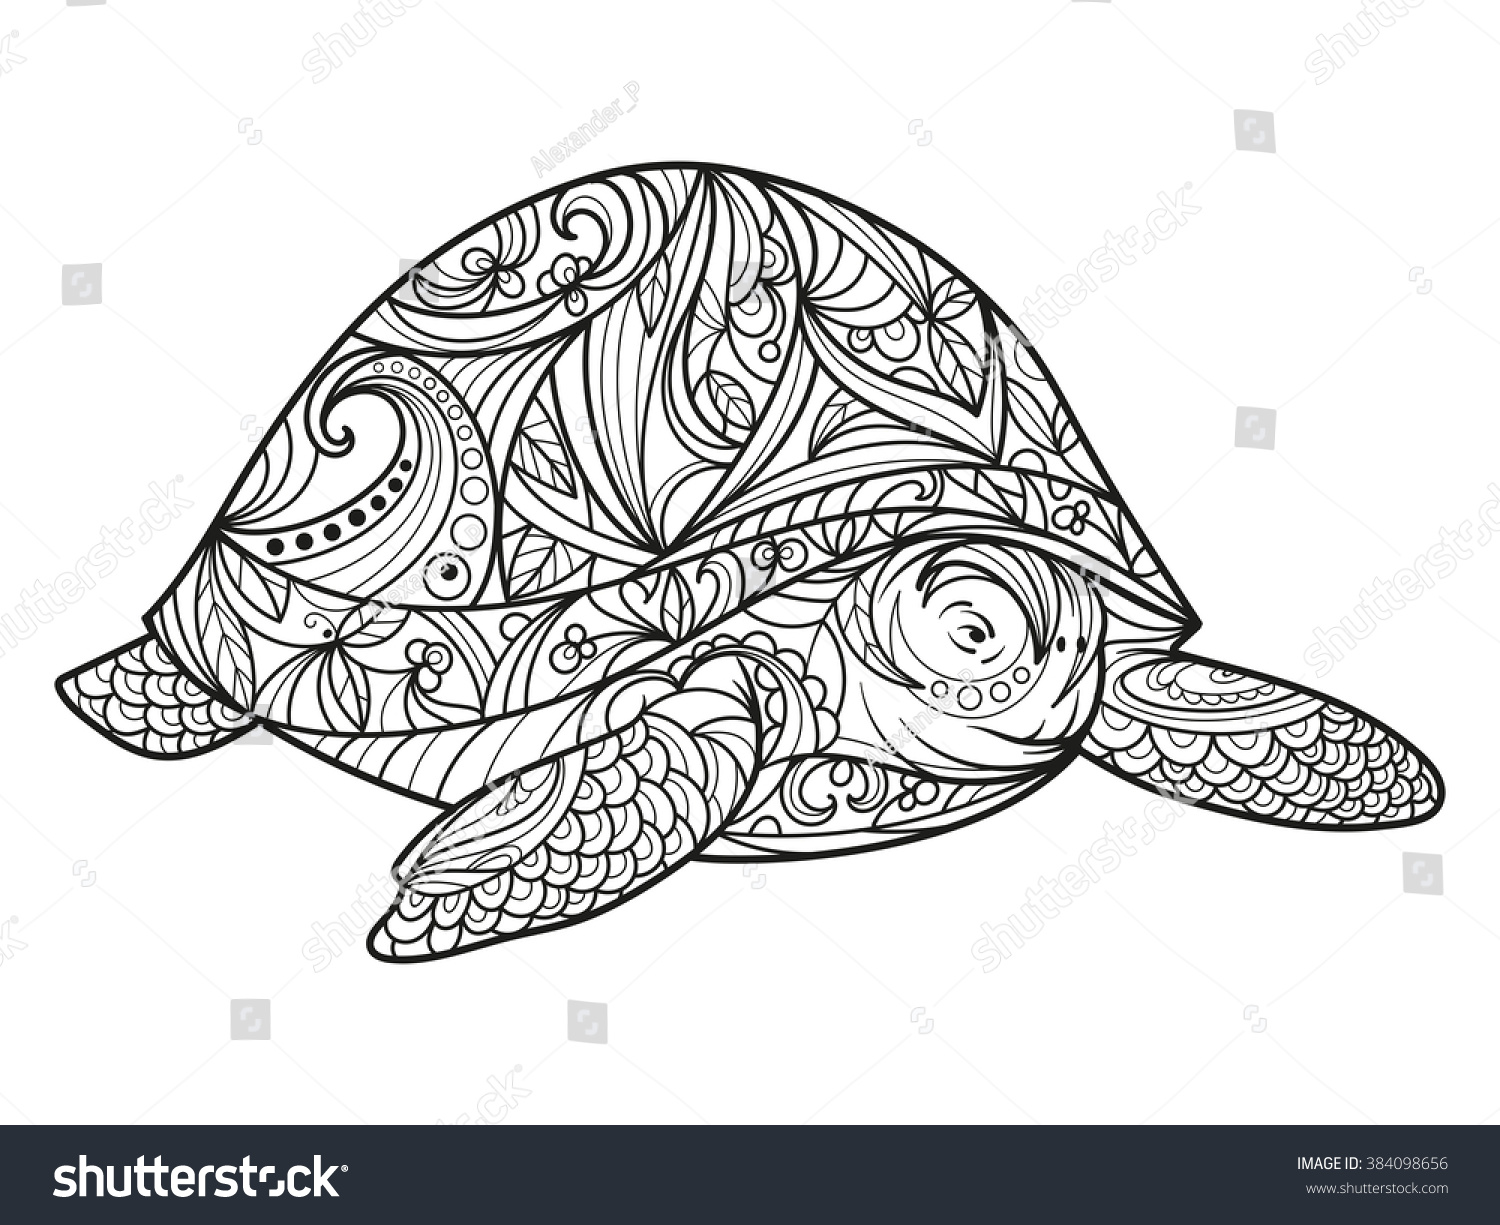 SVG of Turtle coloring book for adults vector illustration. Anti-stress coloring for adult. Zentangle style. Black and white lines. Lace pattern svg